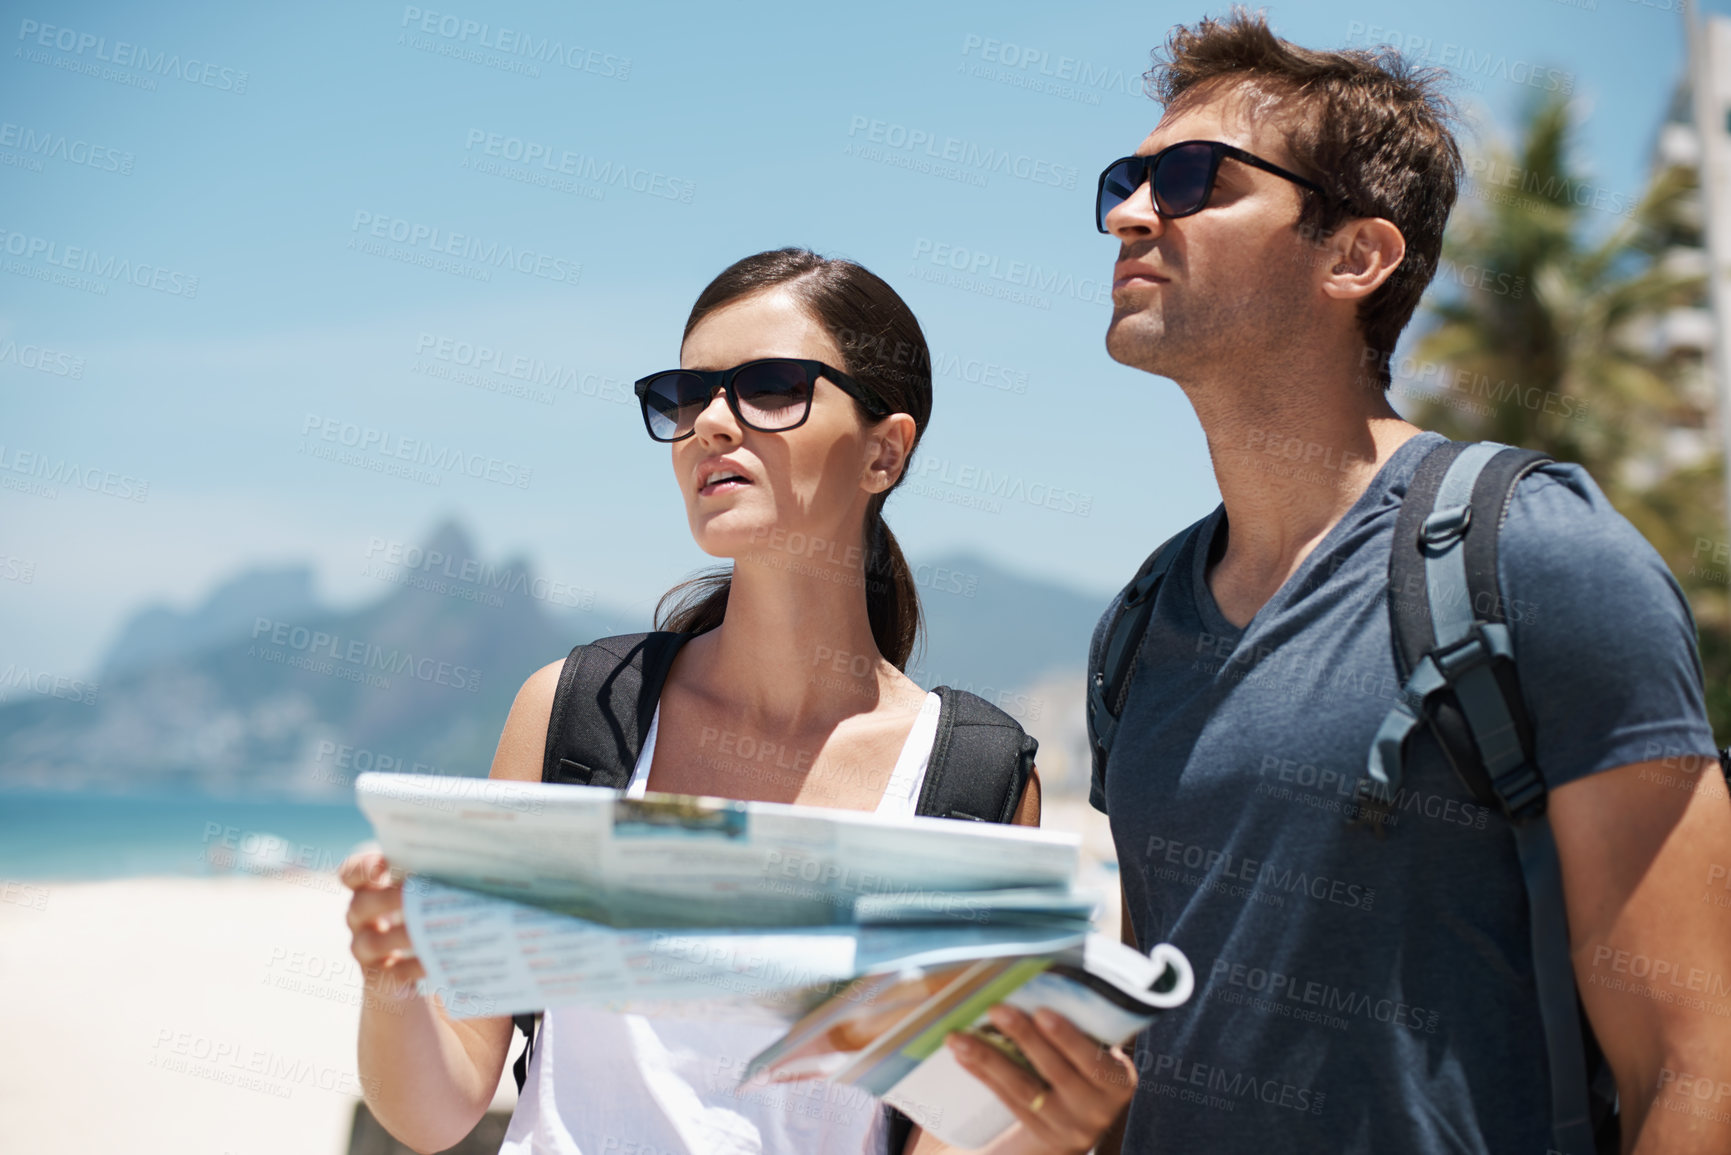 Buy stock photo Shot of a young couple looking at a map while standing on a beach